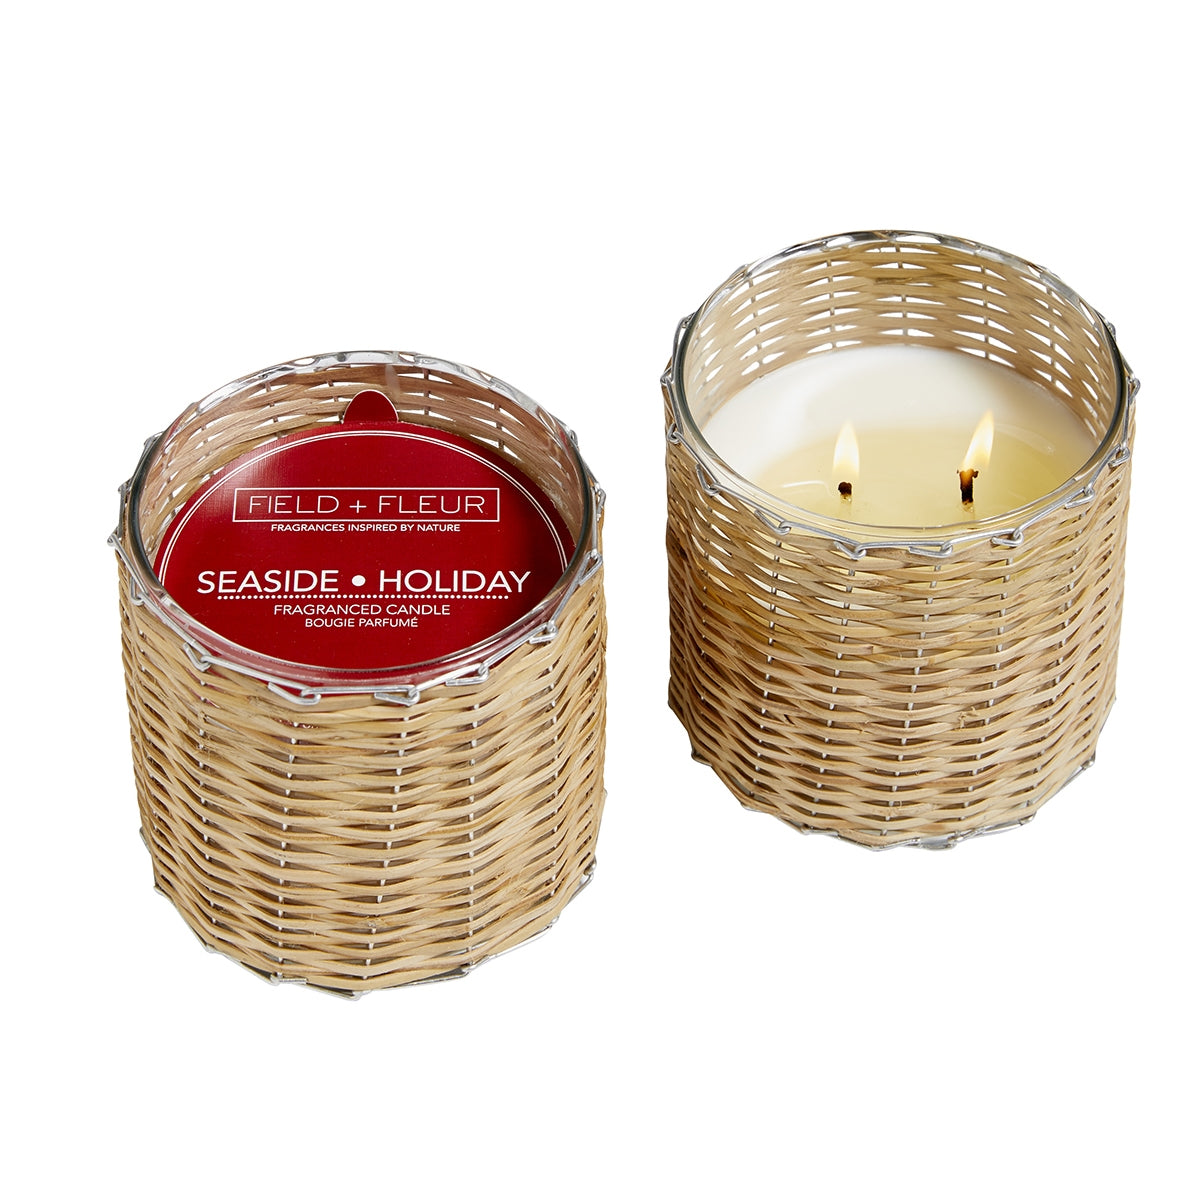 SEASIDE HOLIDAY Field + Fleur Reed 2-Wick Handwoven 12 oz Scented Jar Candle